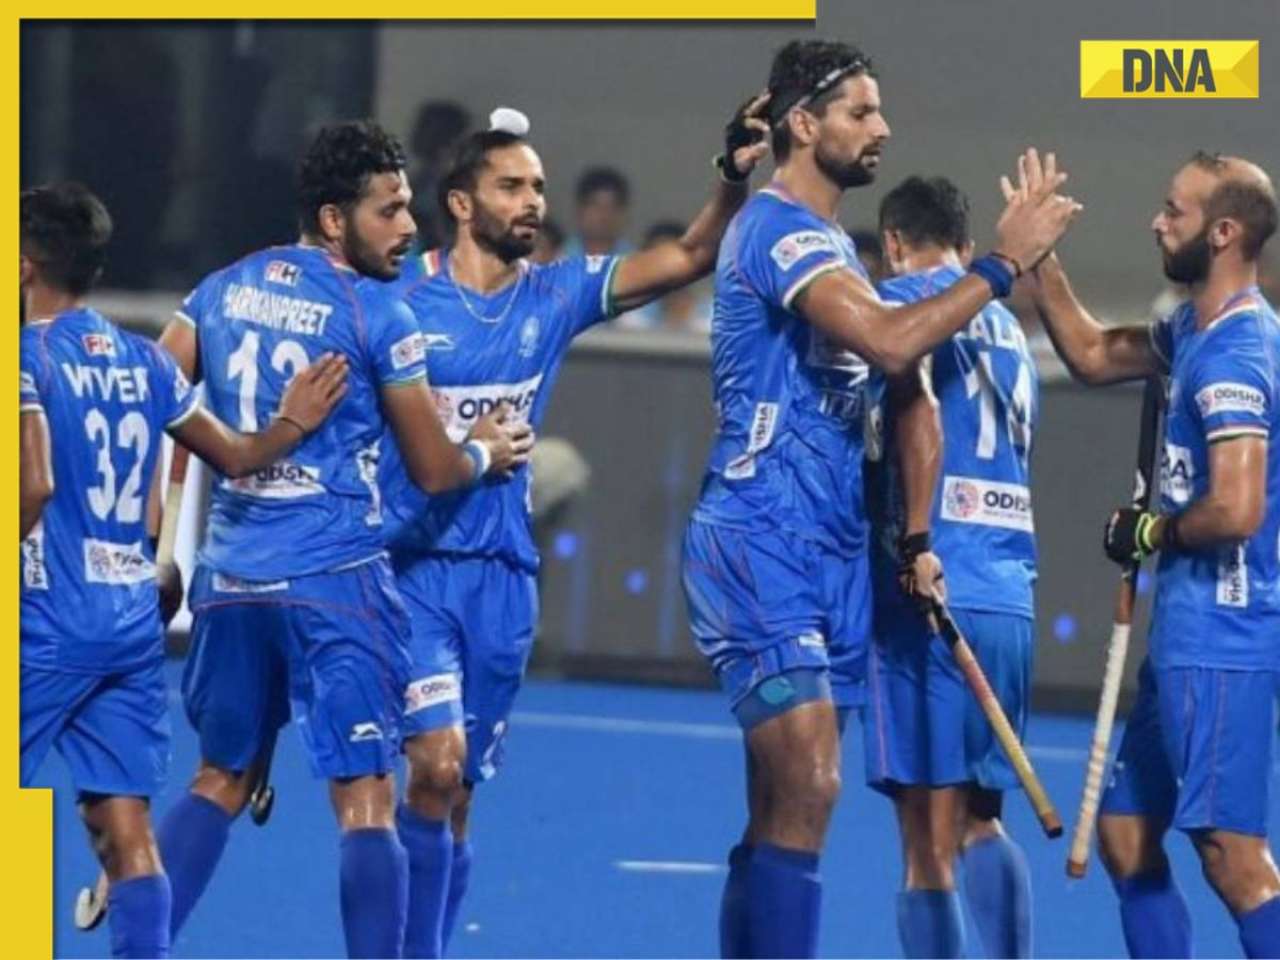 Paris Olympics 2024: Indian men’s hockey team to begin campaign against New Zealand on this date